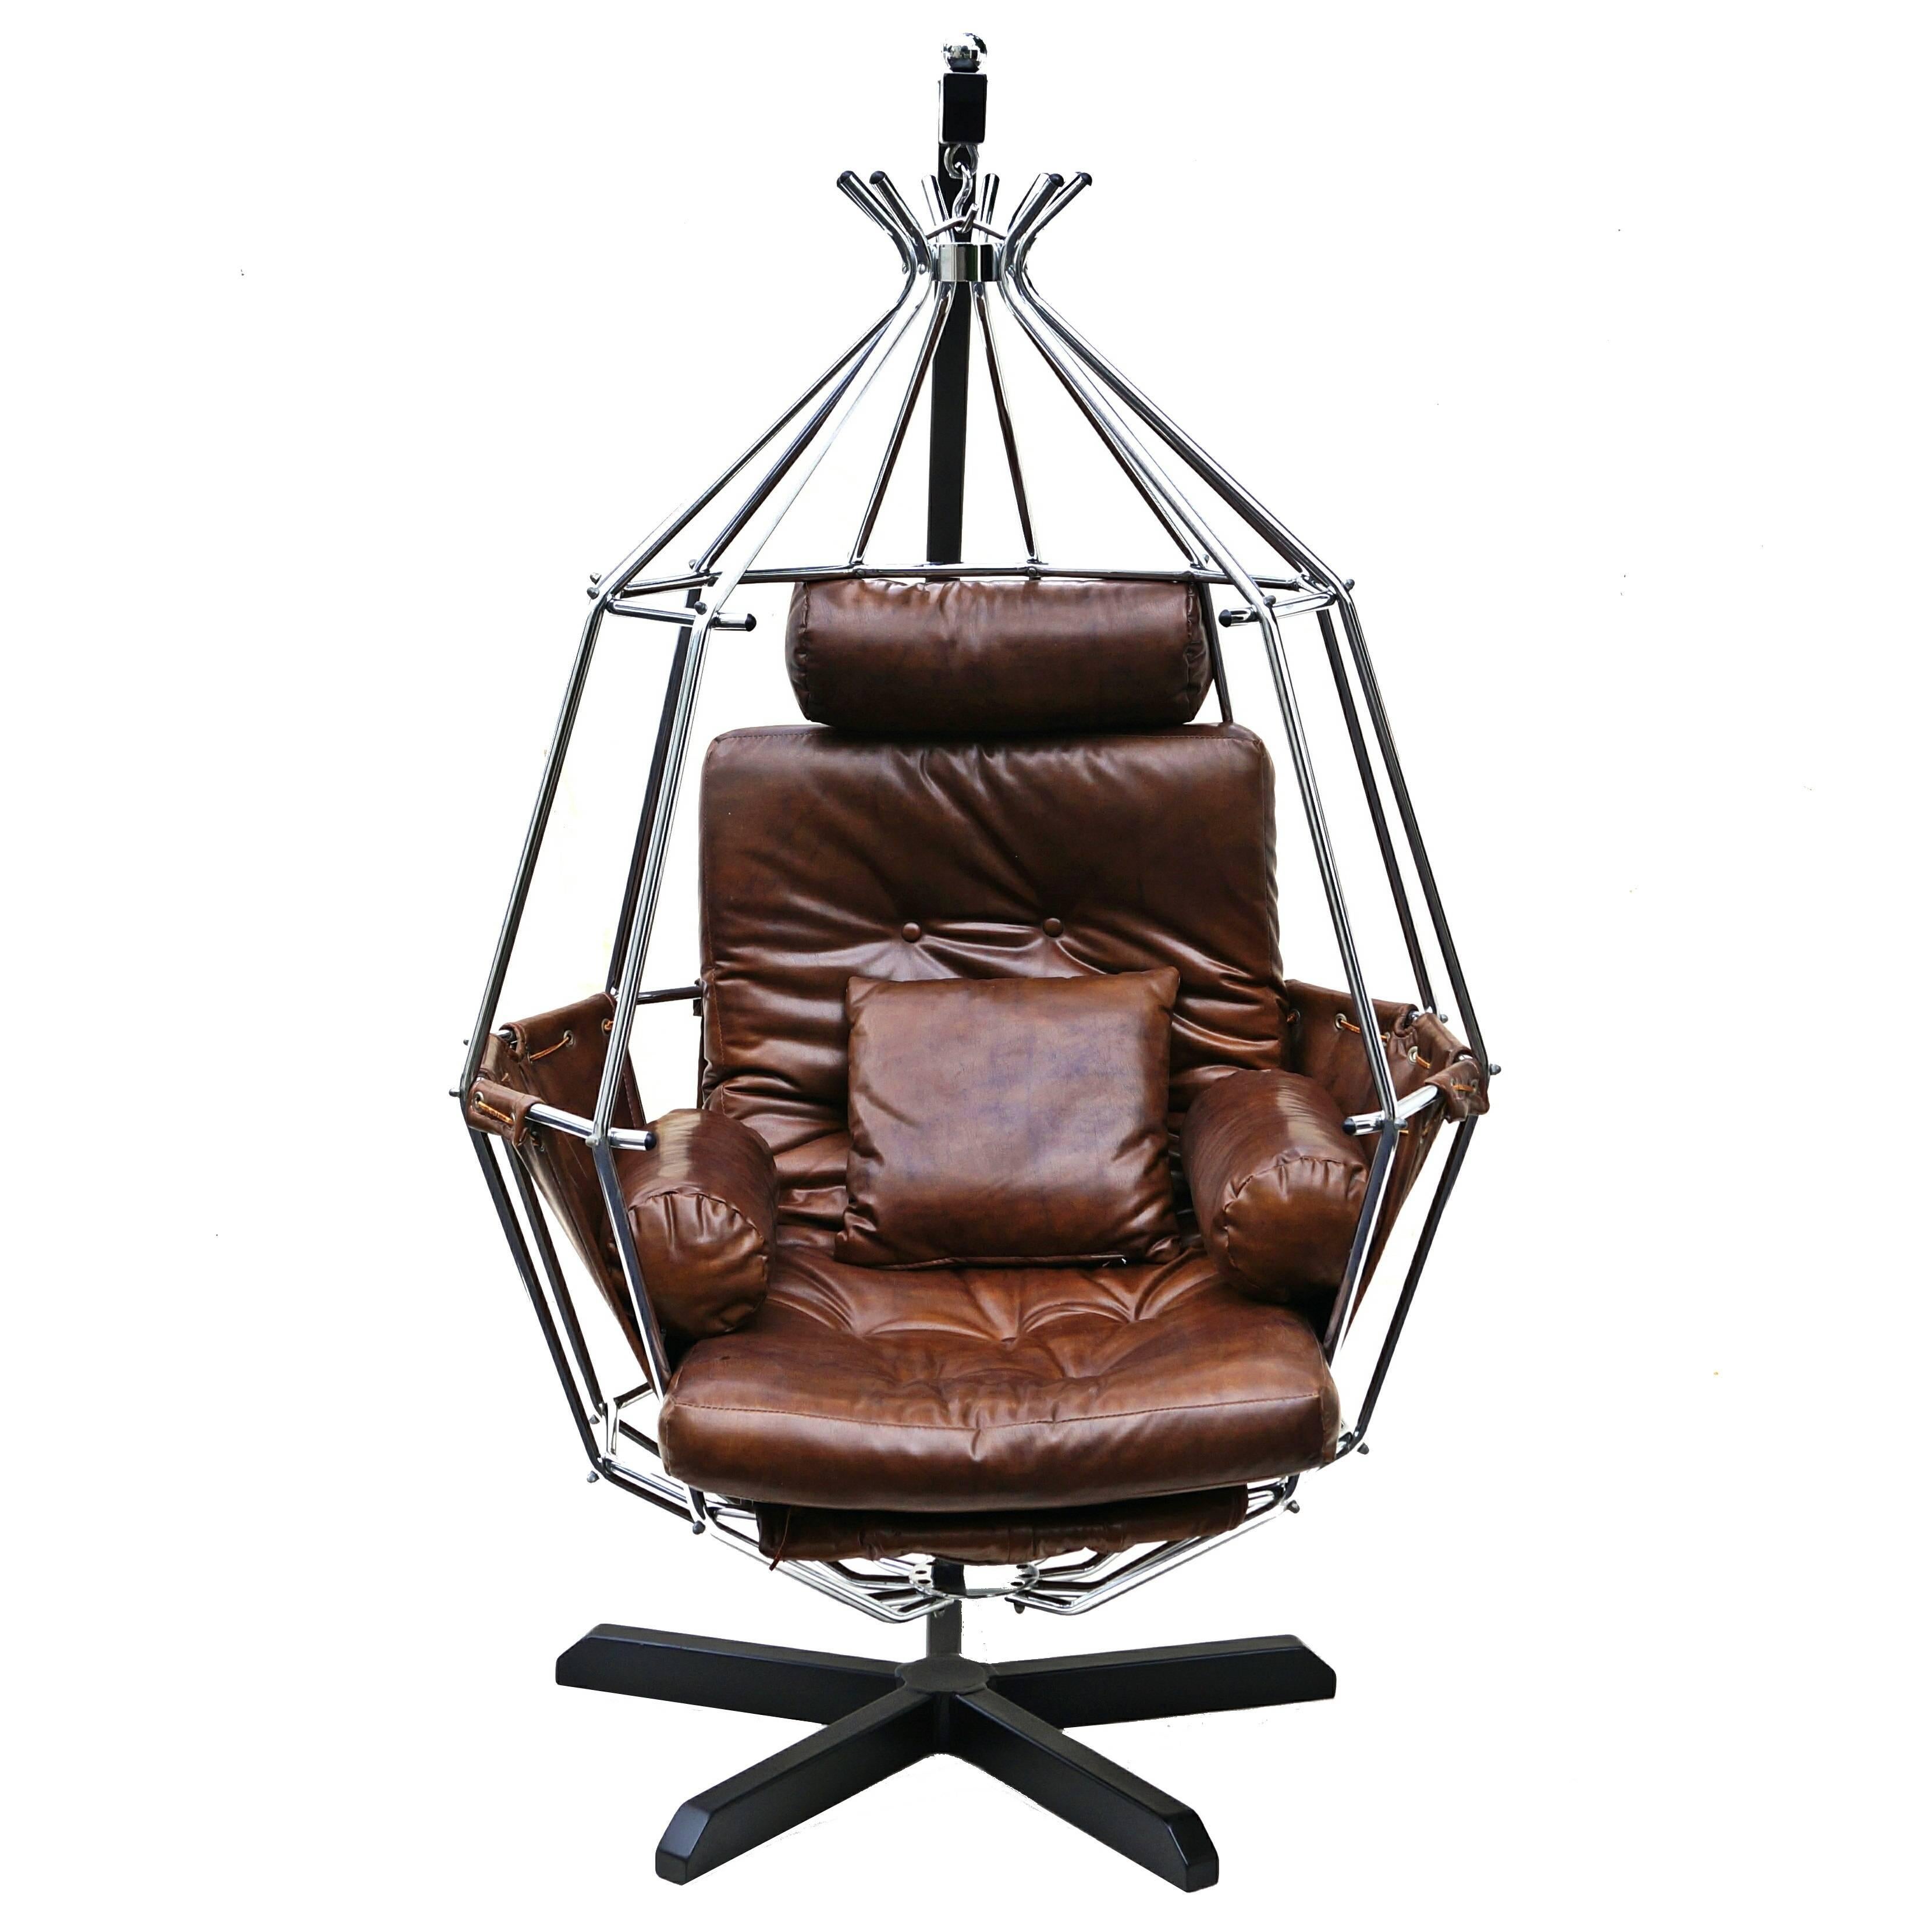 Ib Arberg Hanging Parrot Mid-Century Modern Chair For Sale at 1stDibs |  parrot chair